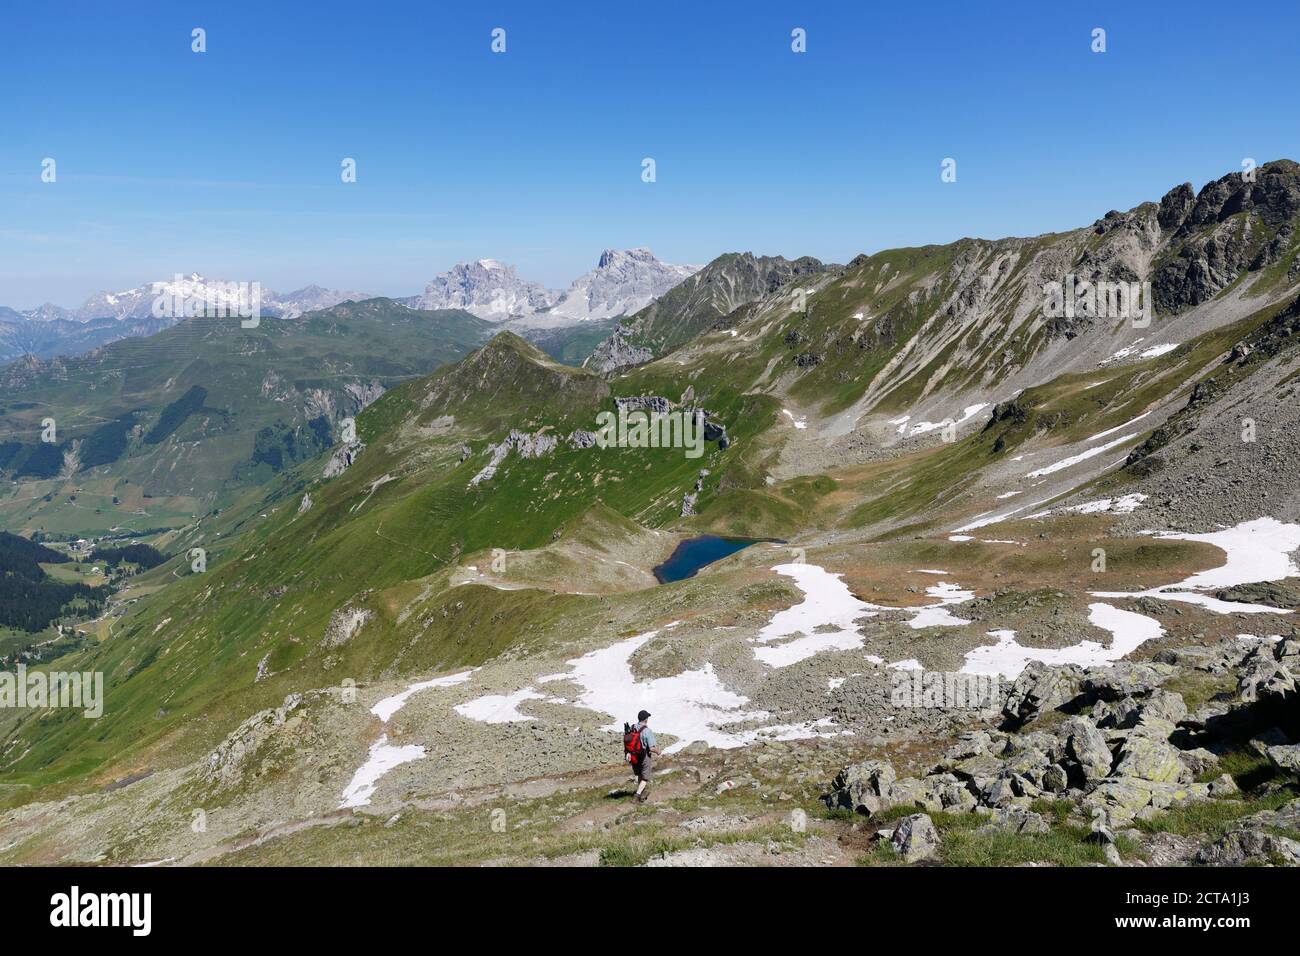 Switzerland, Grisons, Ratikon, Lake Grfiersee with Three towers and Sulzfluh mountains in background, person hiking at Austrian border Stock Photo